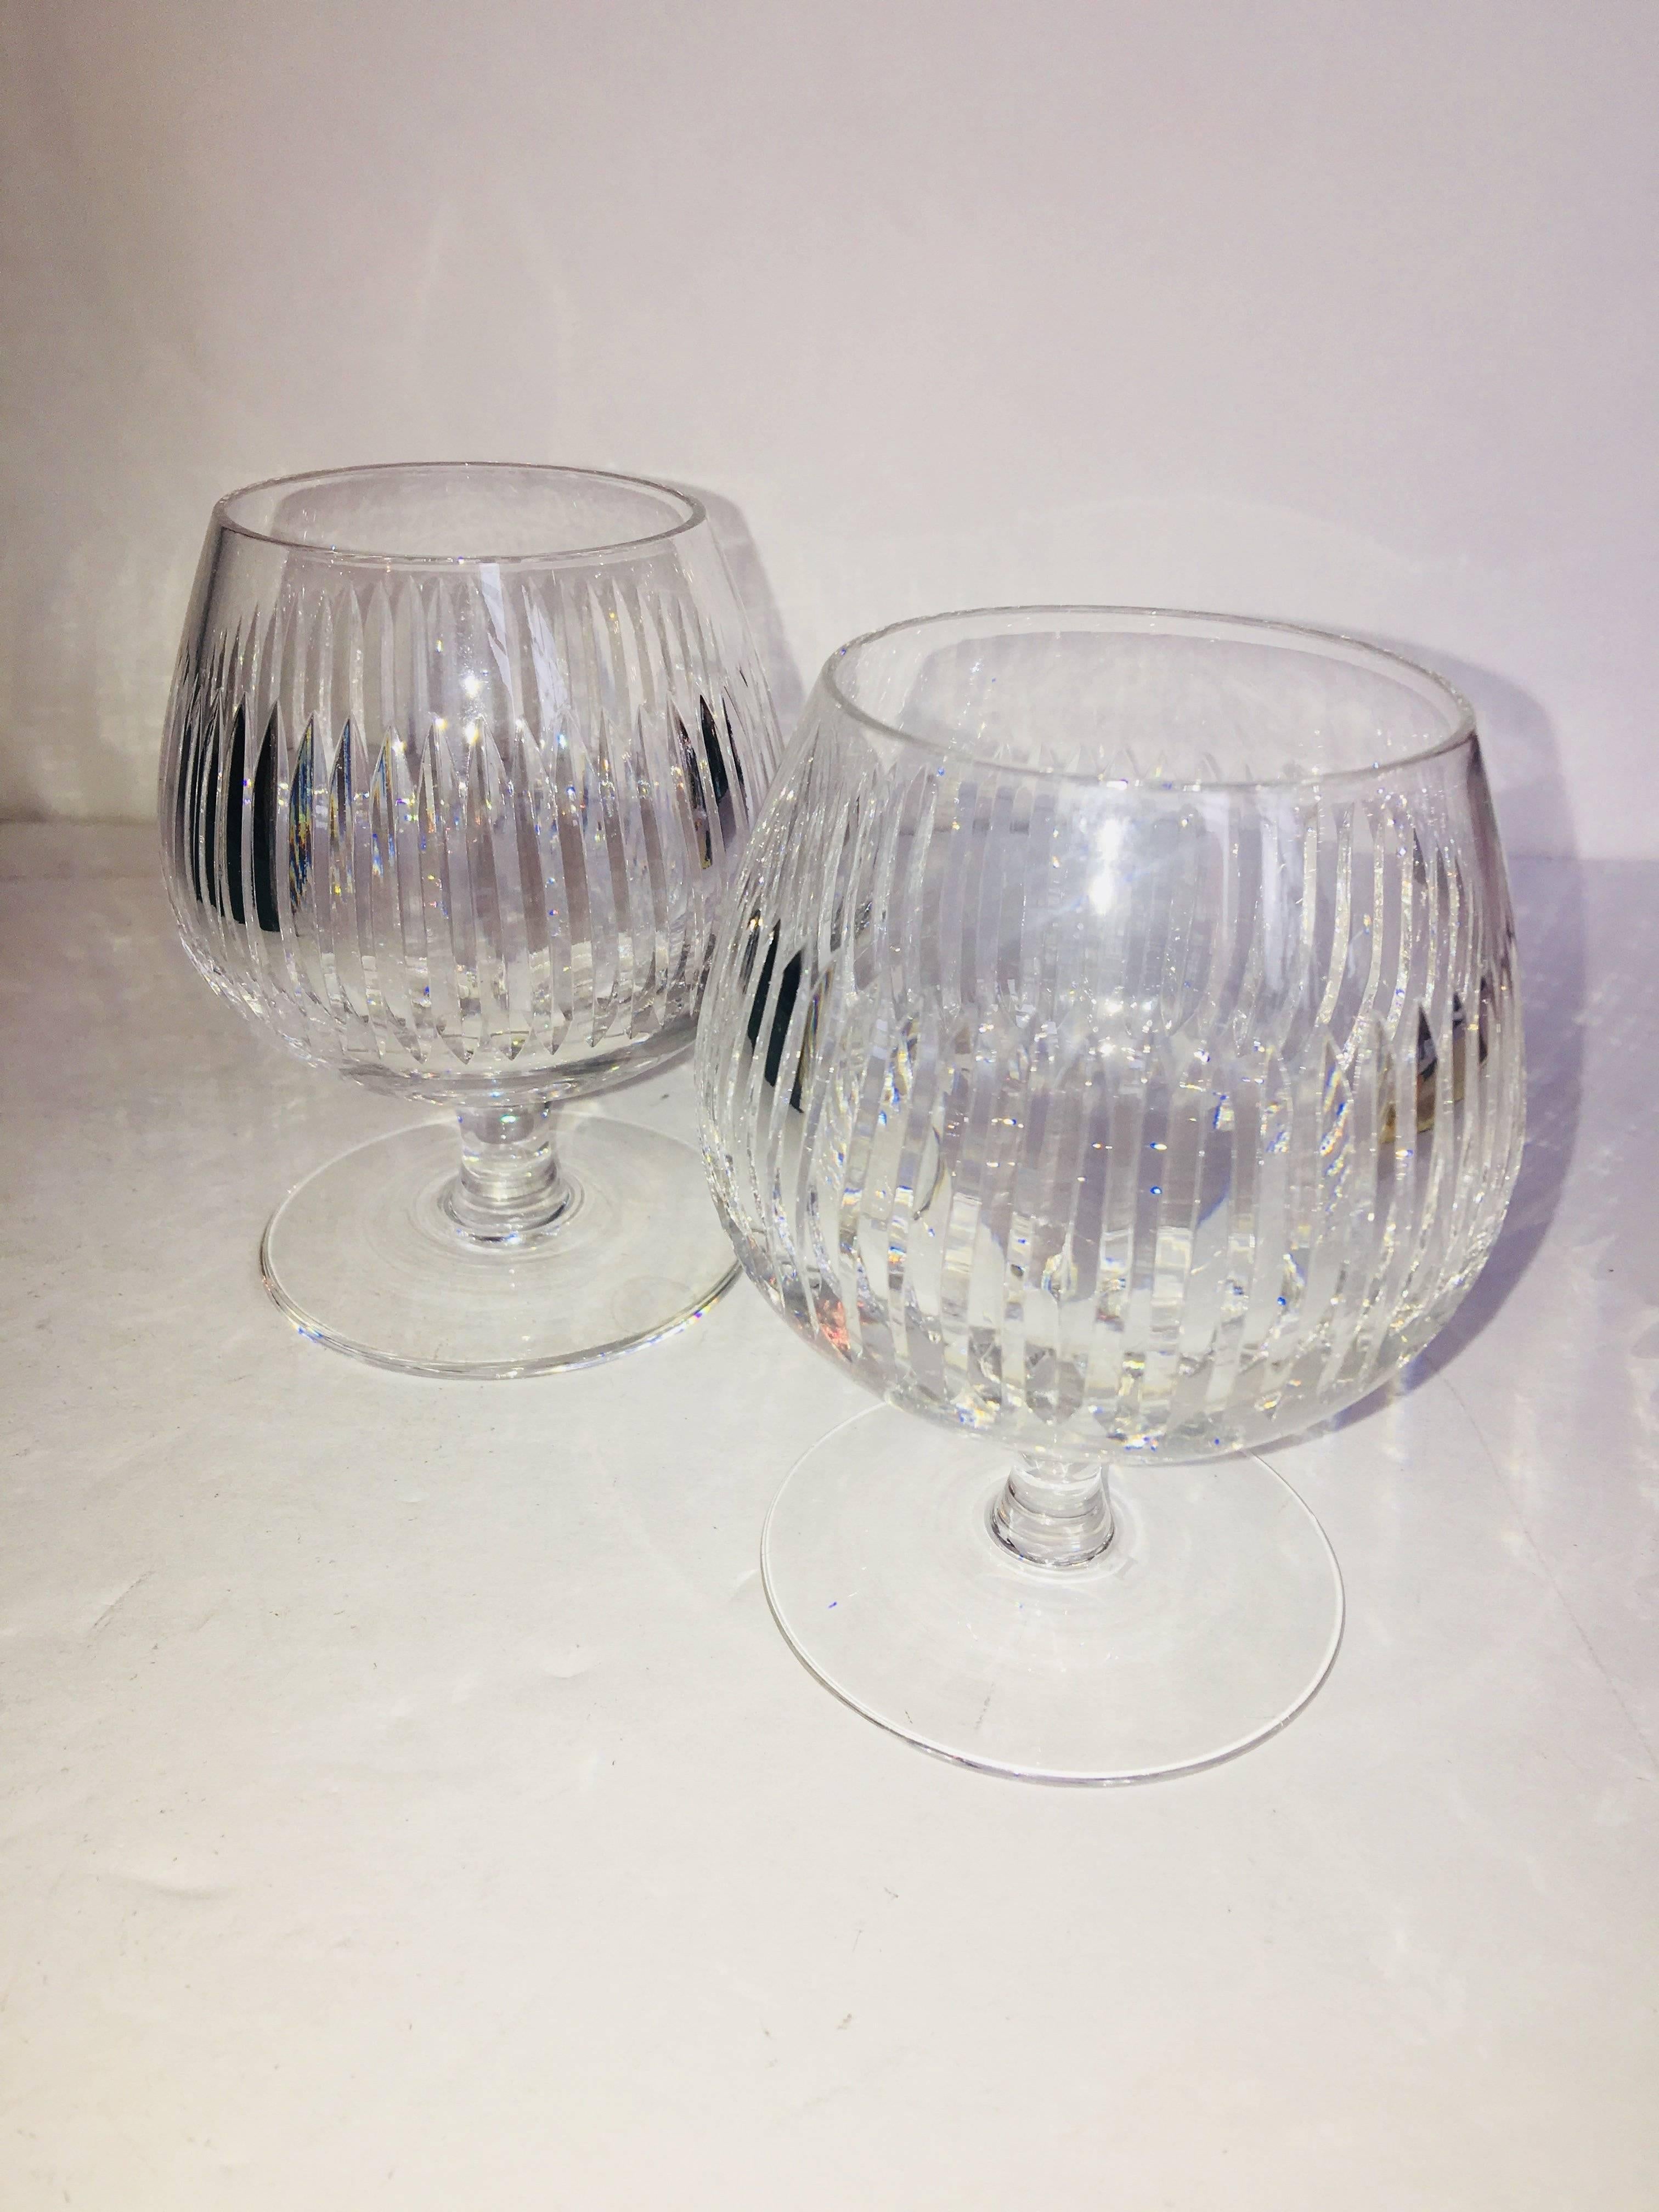 Vintage Gucci brandy snifters in original box with metal clasp and velvet interior. Pair of two etched crystal brandy snifters measuring 4.5